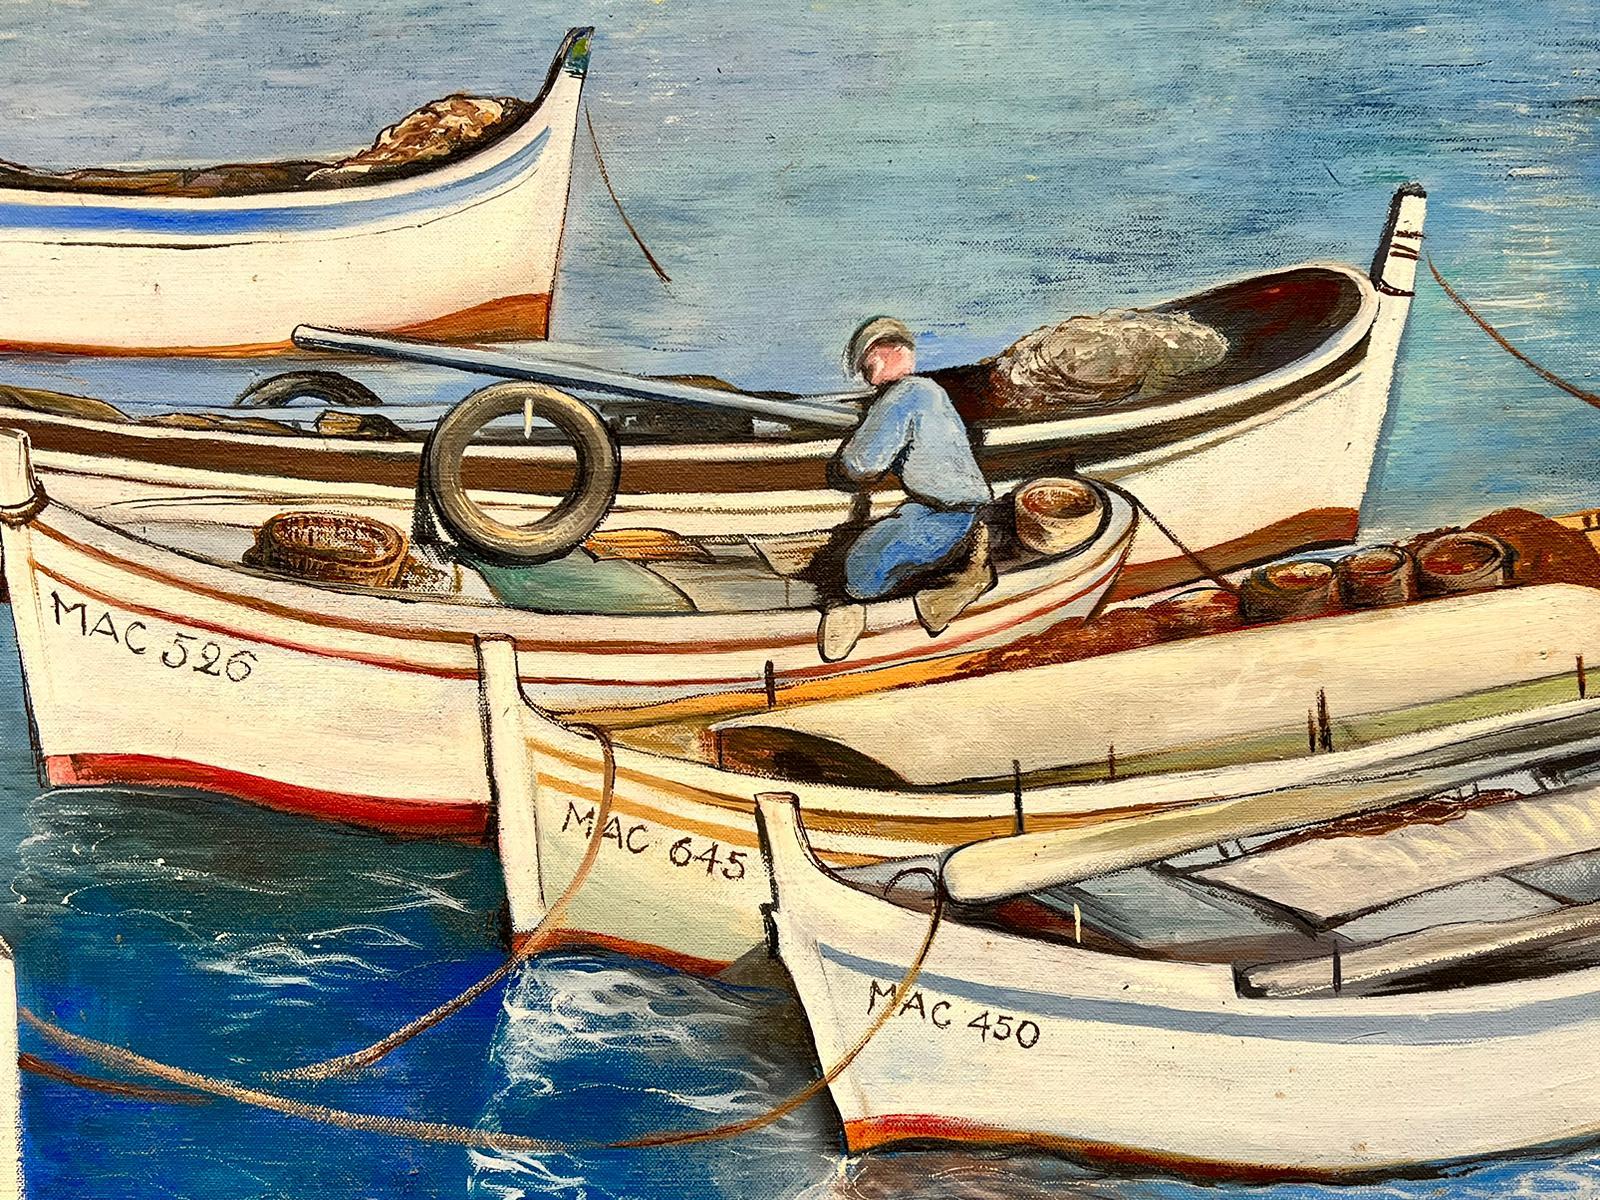 Huge 20th Century French Signed Oil Fishing Boats in South of France Harbour - Impressionist Painting by G. Lefevre